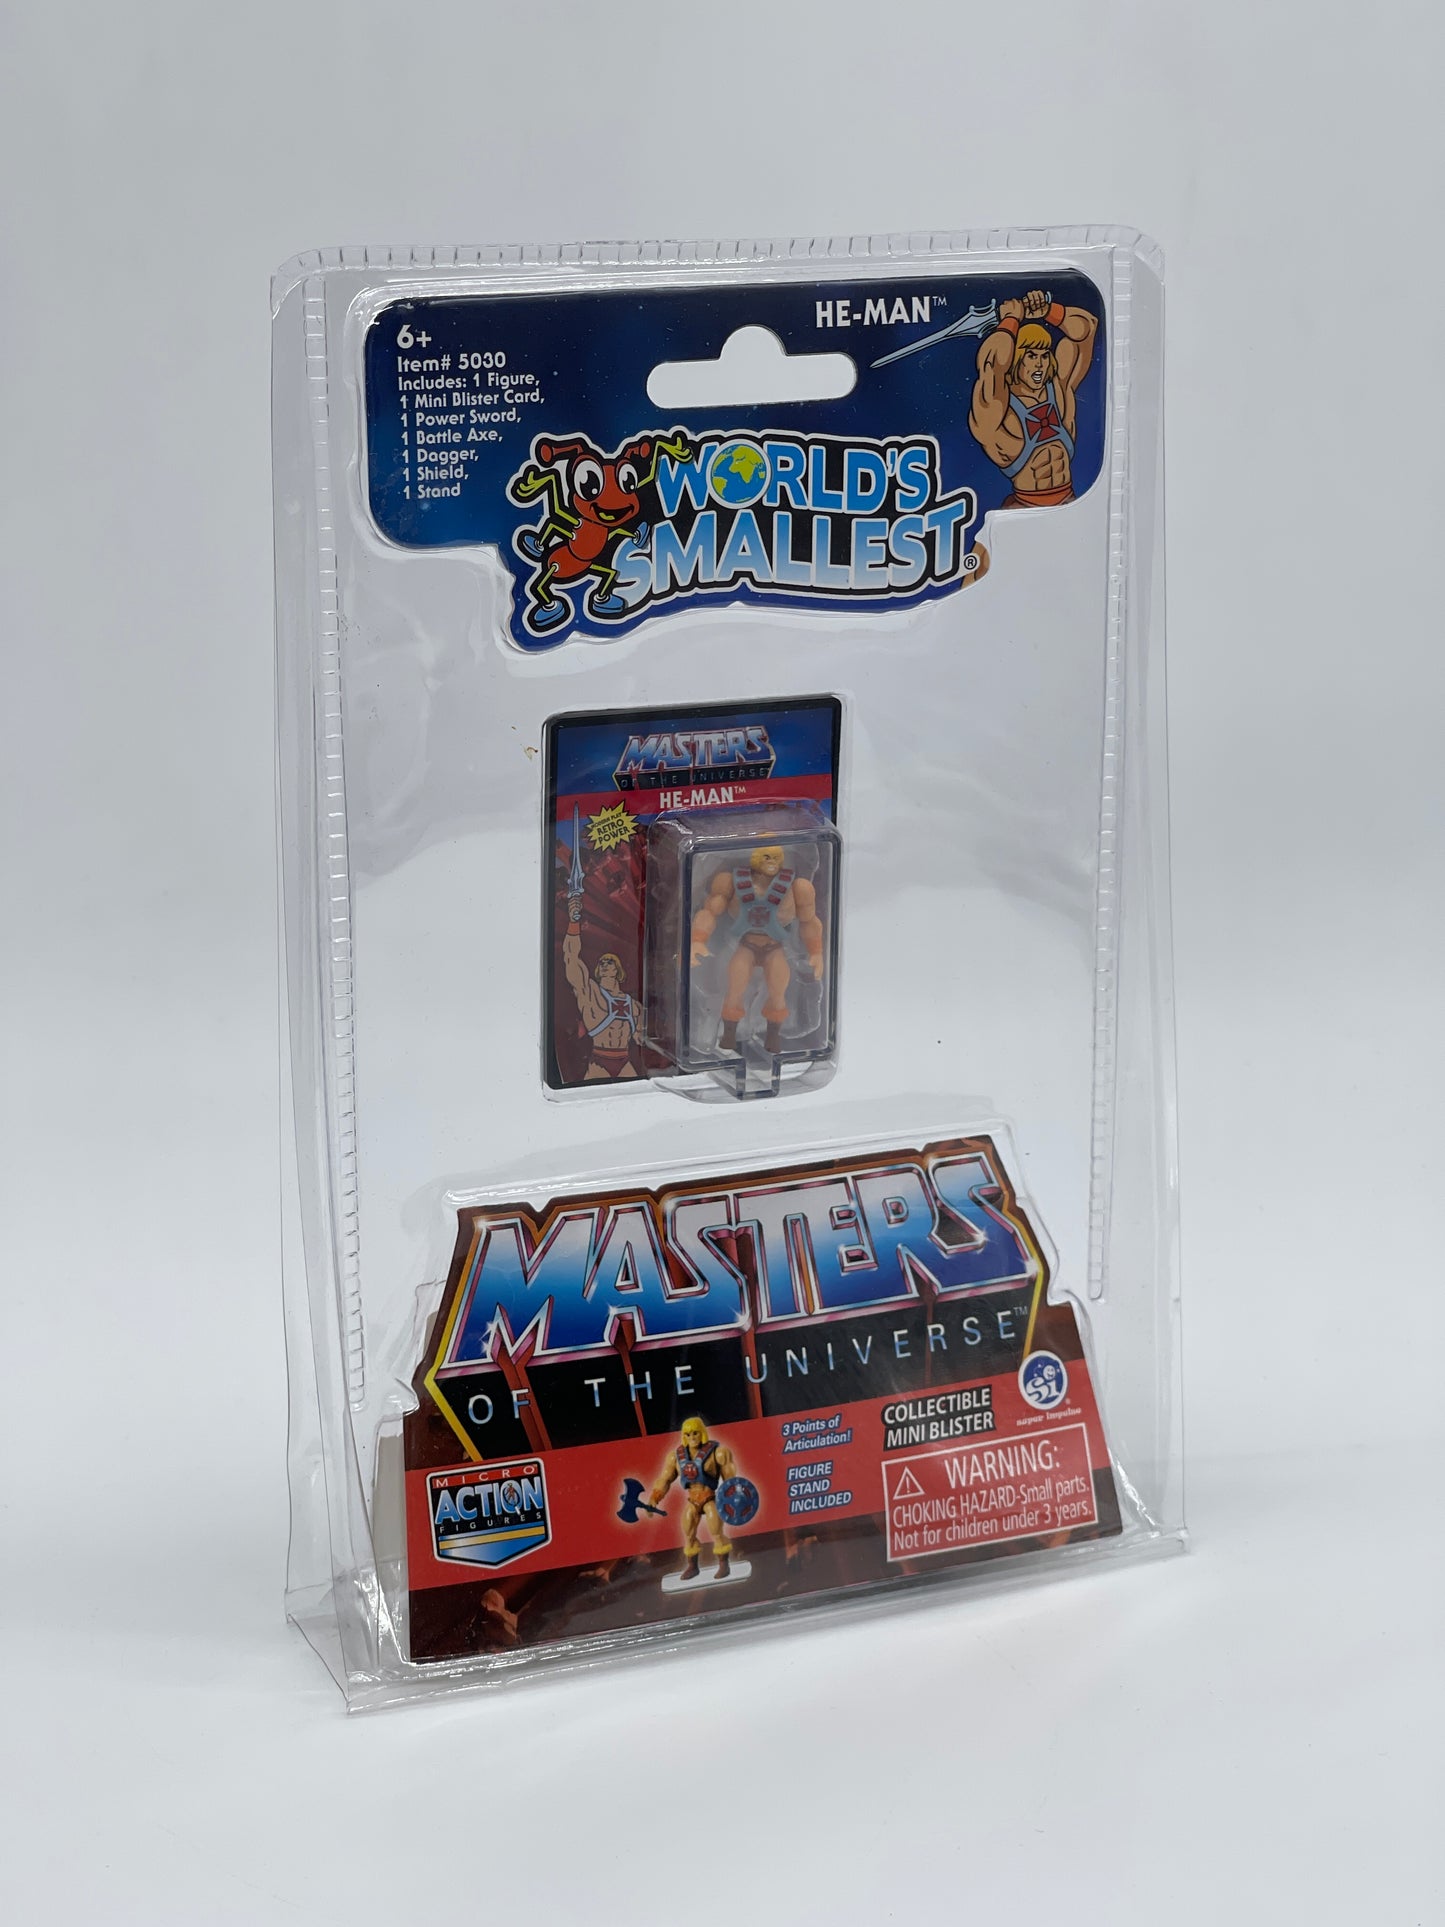 Worlds Smallest "He-Man" Masters of the Universe Micro Action Figure (#5030)